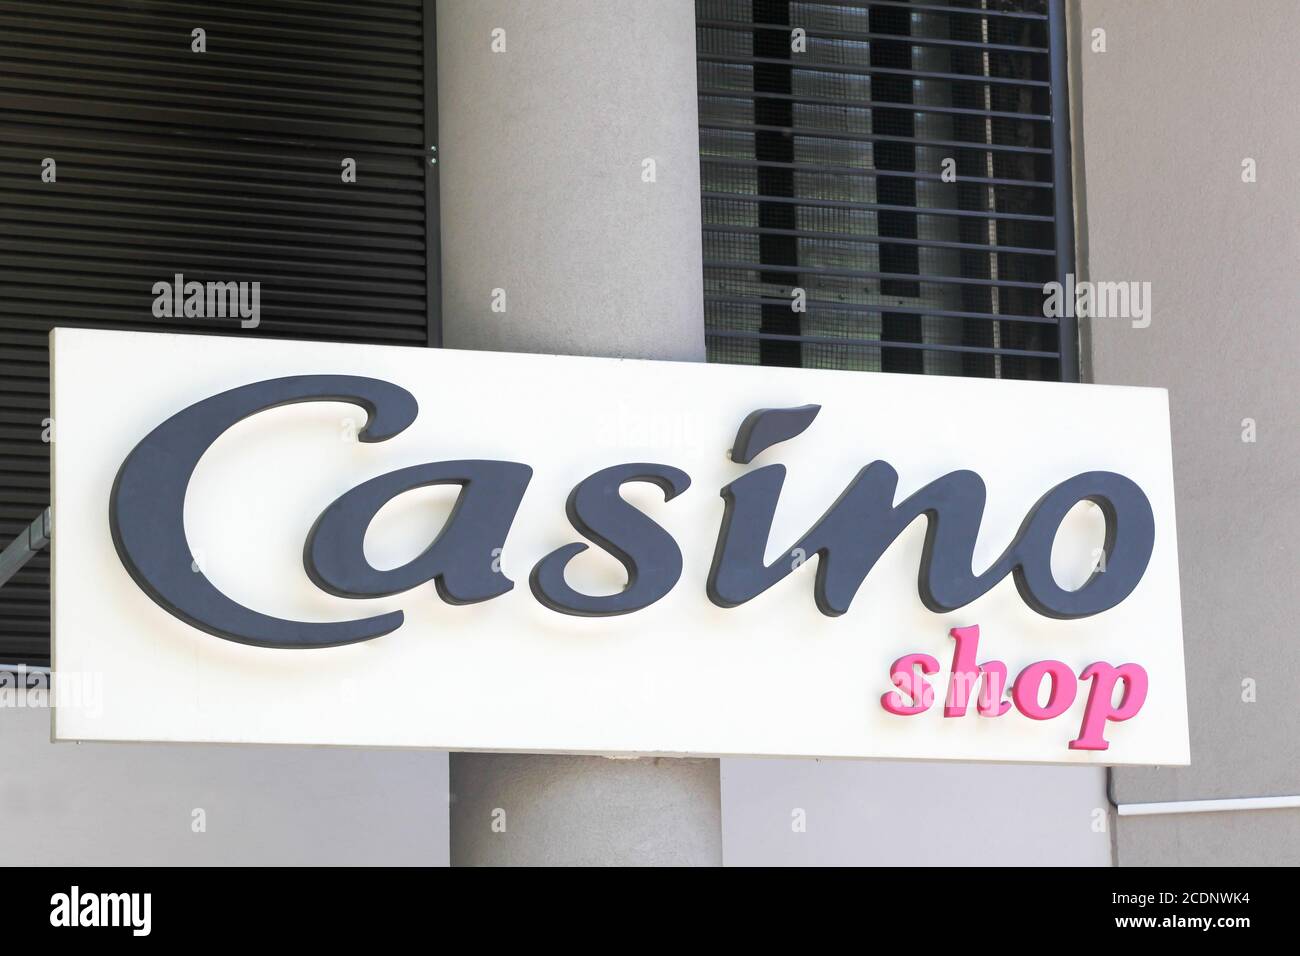 You Can Thank Us Later - 3 Reasons To Stop Thinking About casino porno